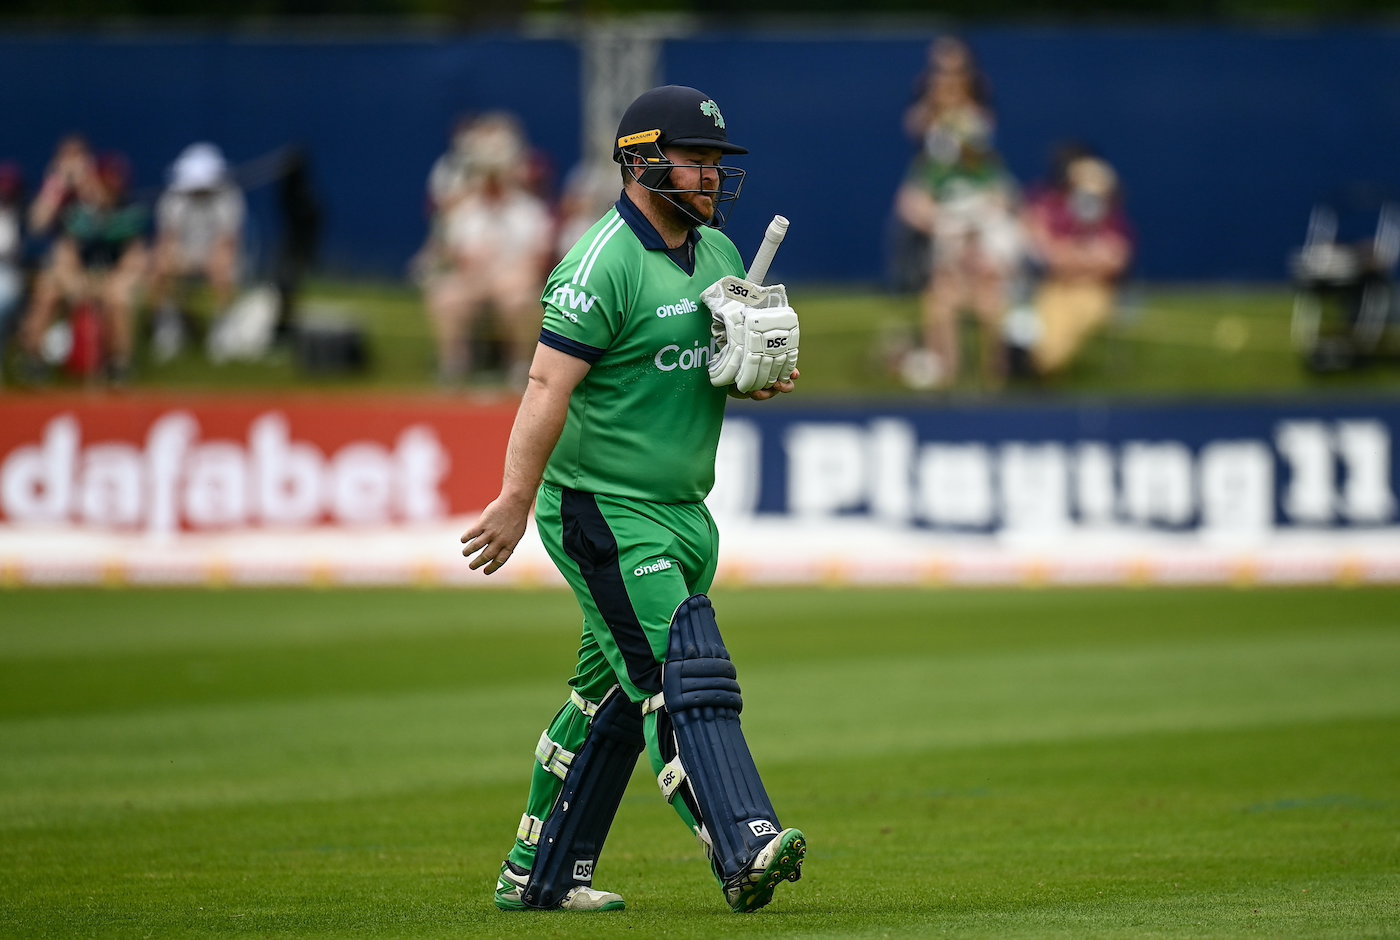 Paul Stirling Profile And Biography Stats Records Averages Photos And Videos